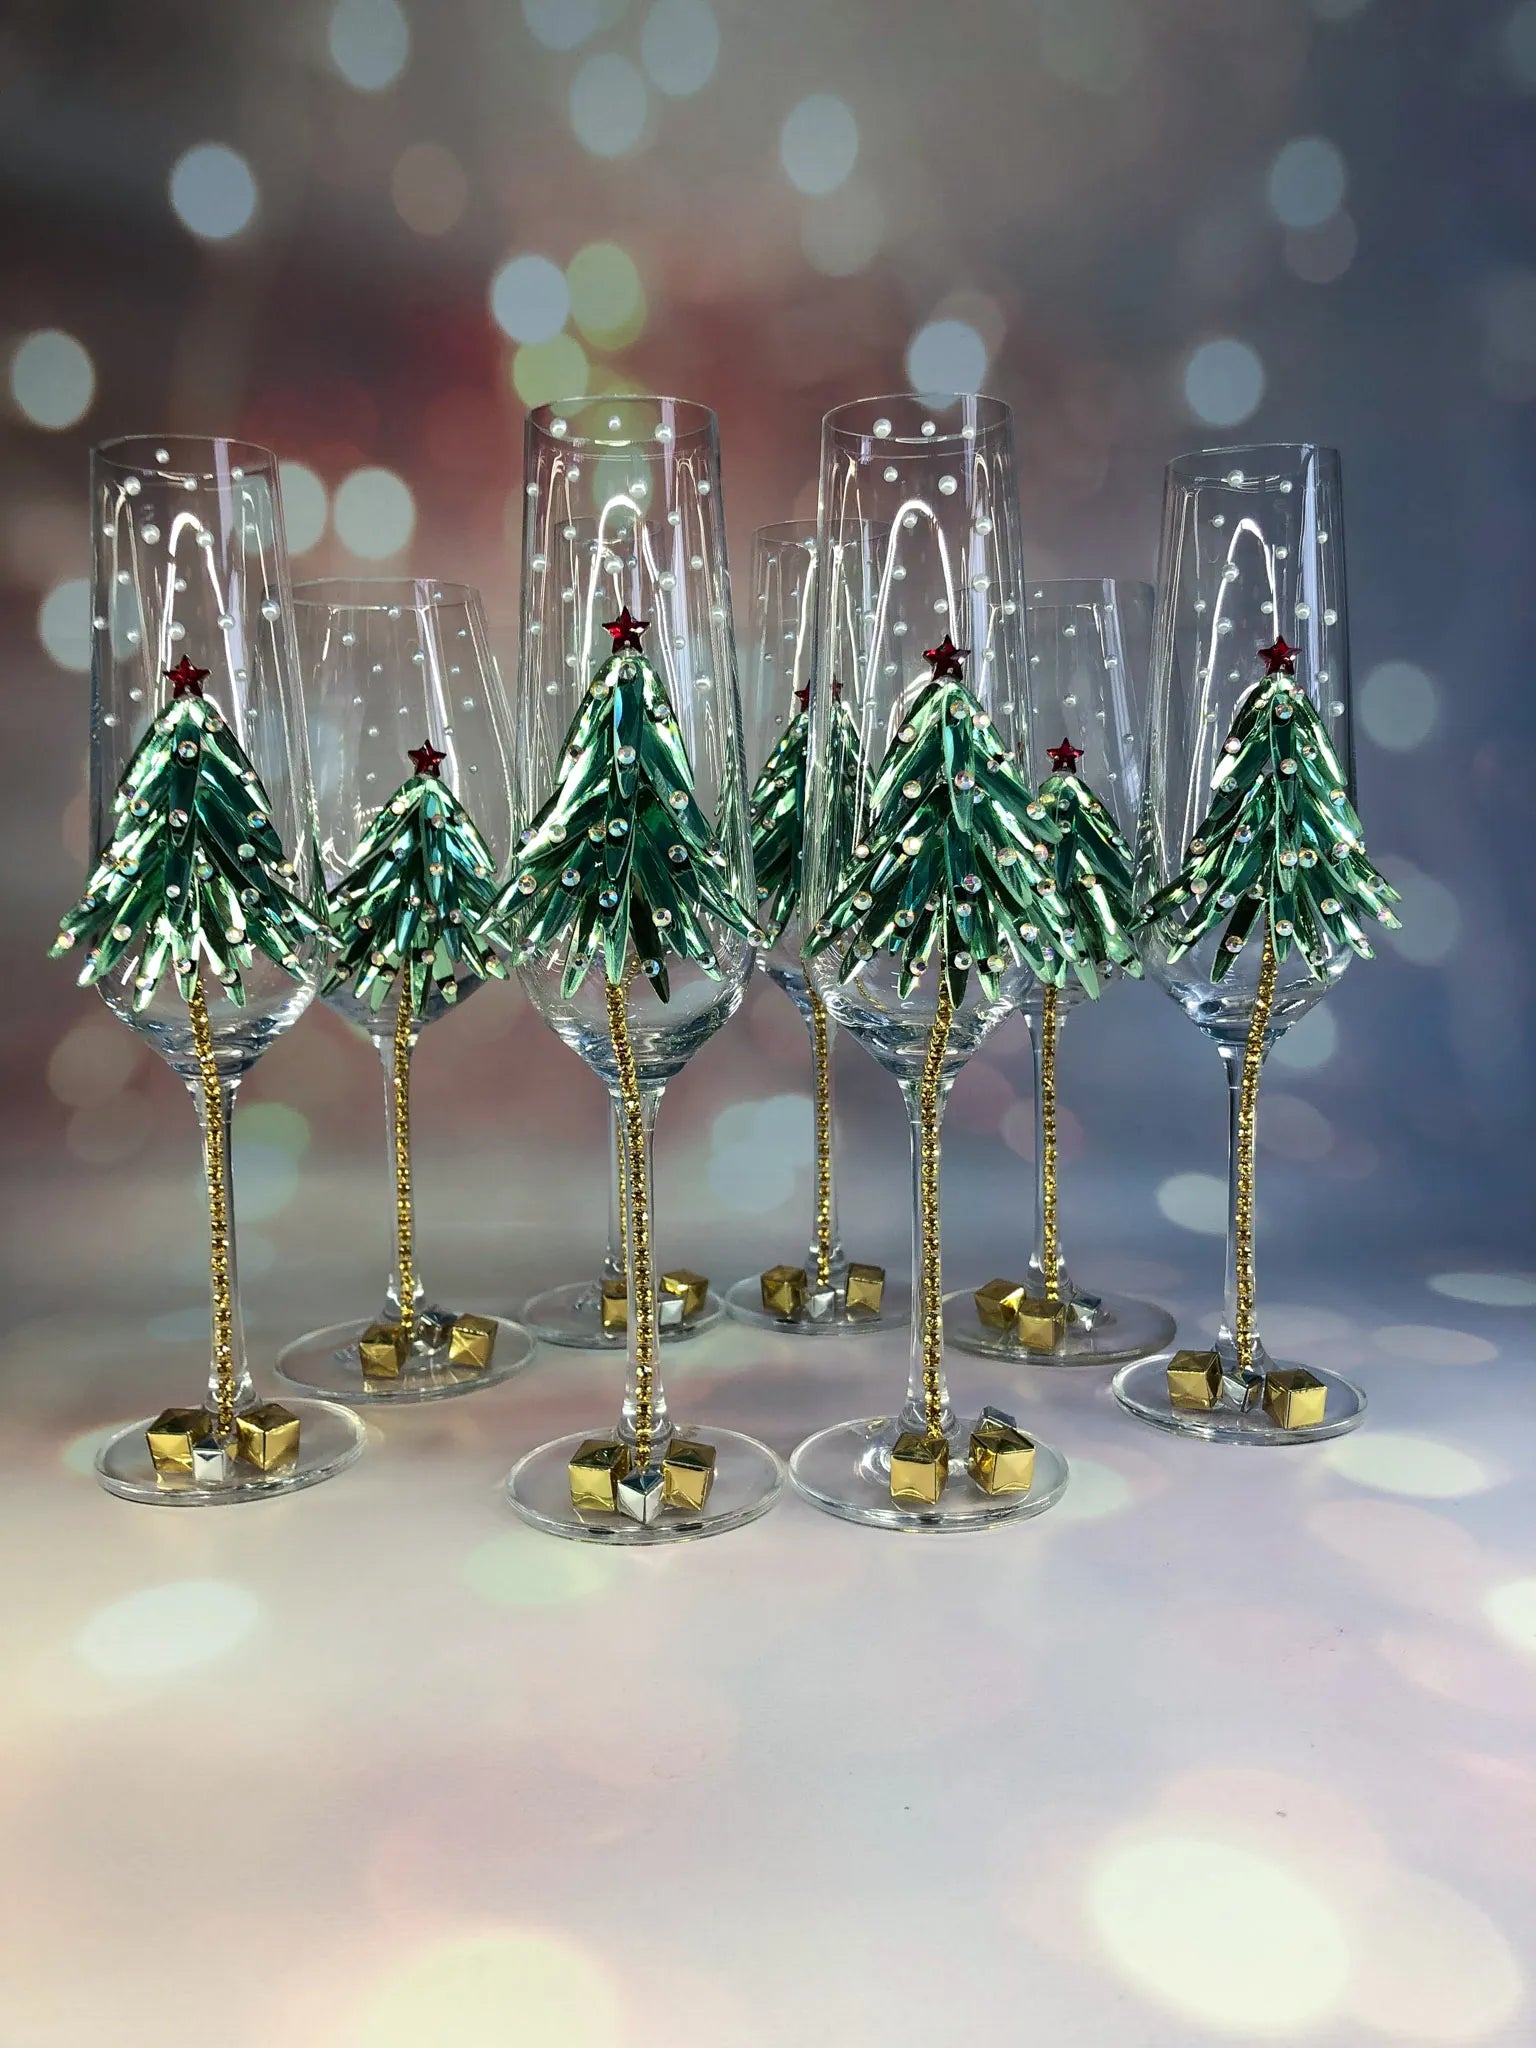 Gold & Silver Christmas Wine Glasses